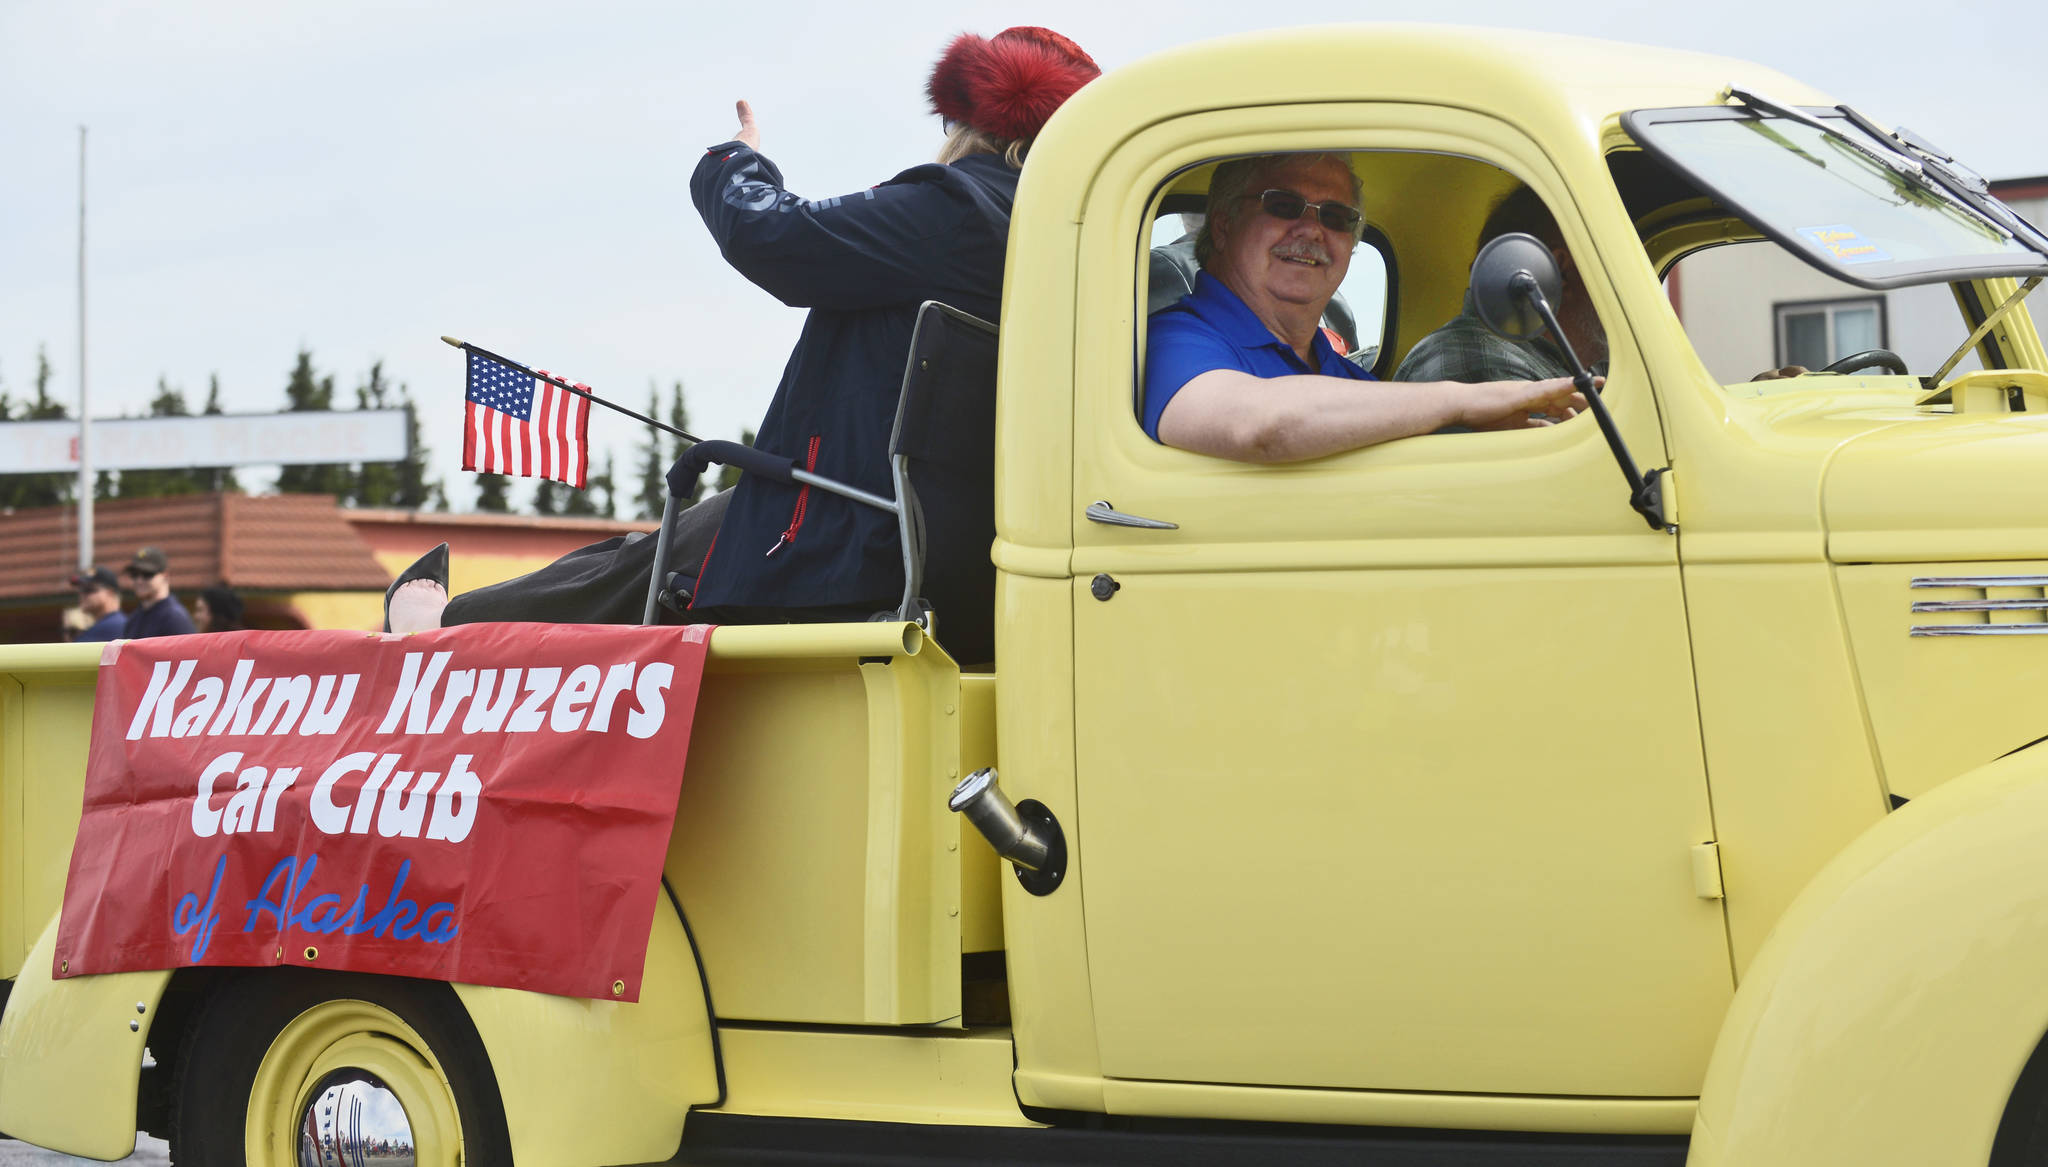 Members of the Kaknu Kruzers Car Club lead a procession of vintage vehicles in the Kenai Fourth of July parade on Wednesday, July 4, 2018 in Kenai, Alaska. (Ben Boettger/Peninsula Clarion).